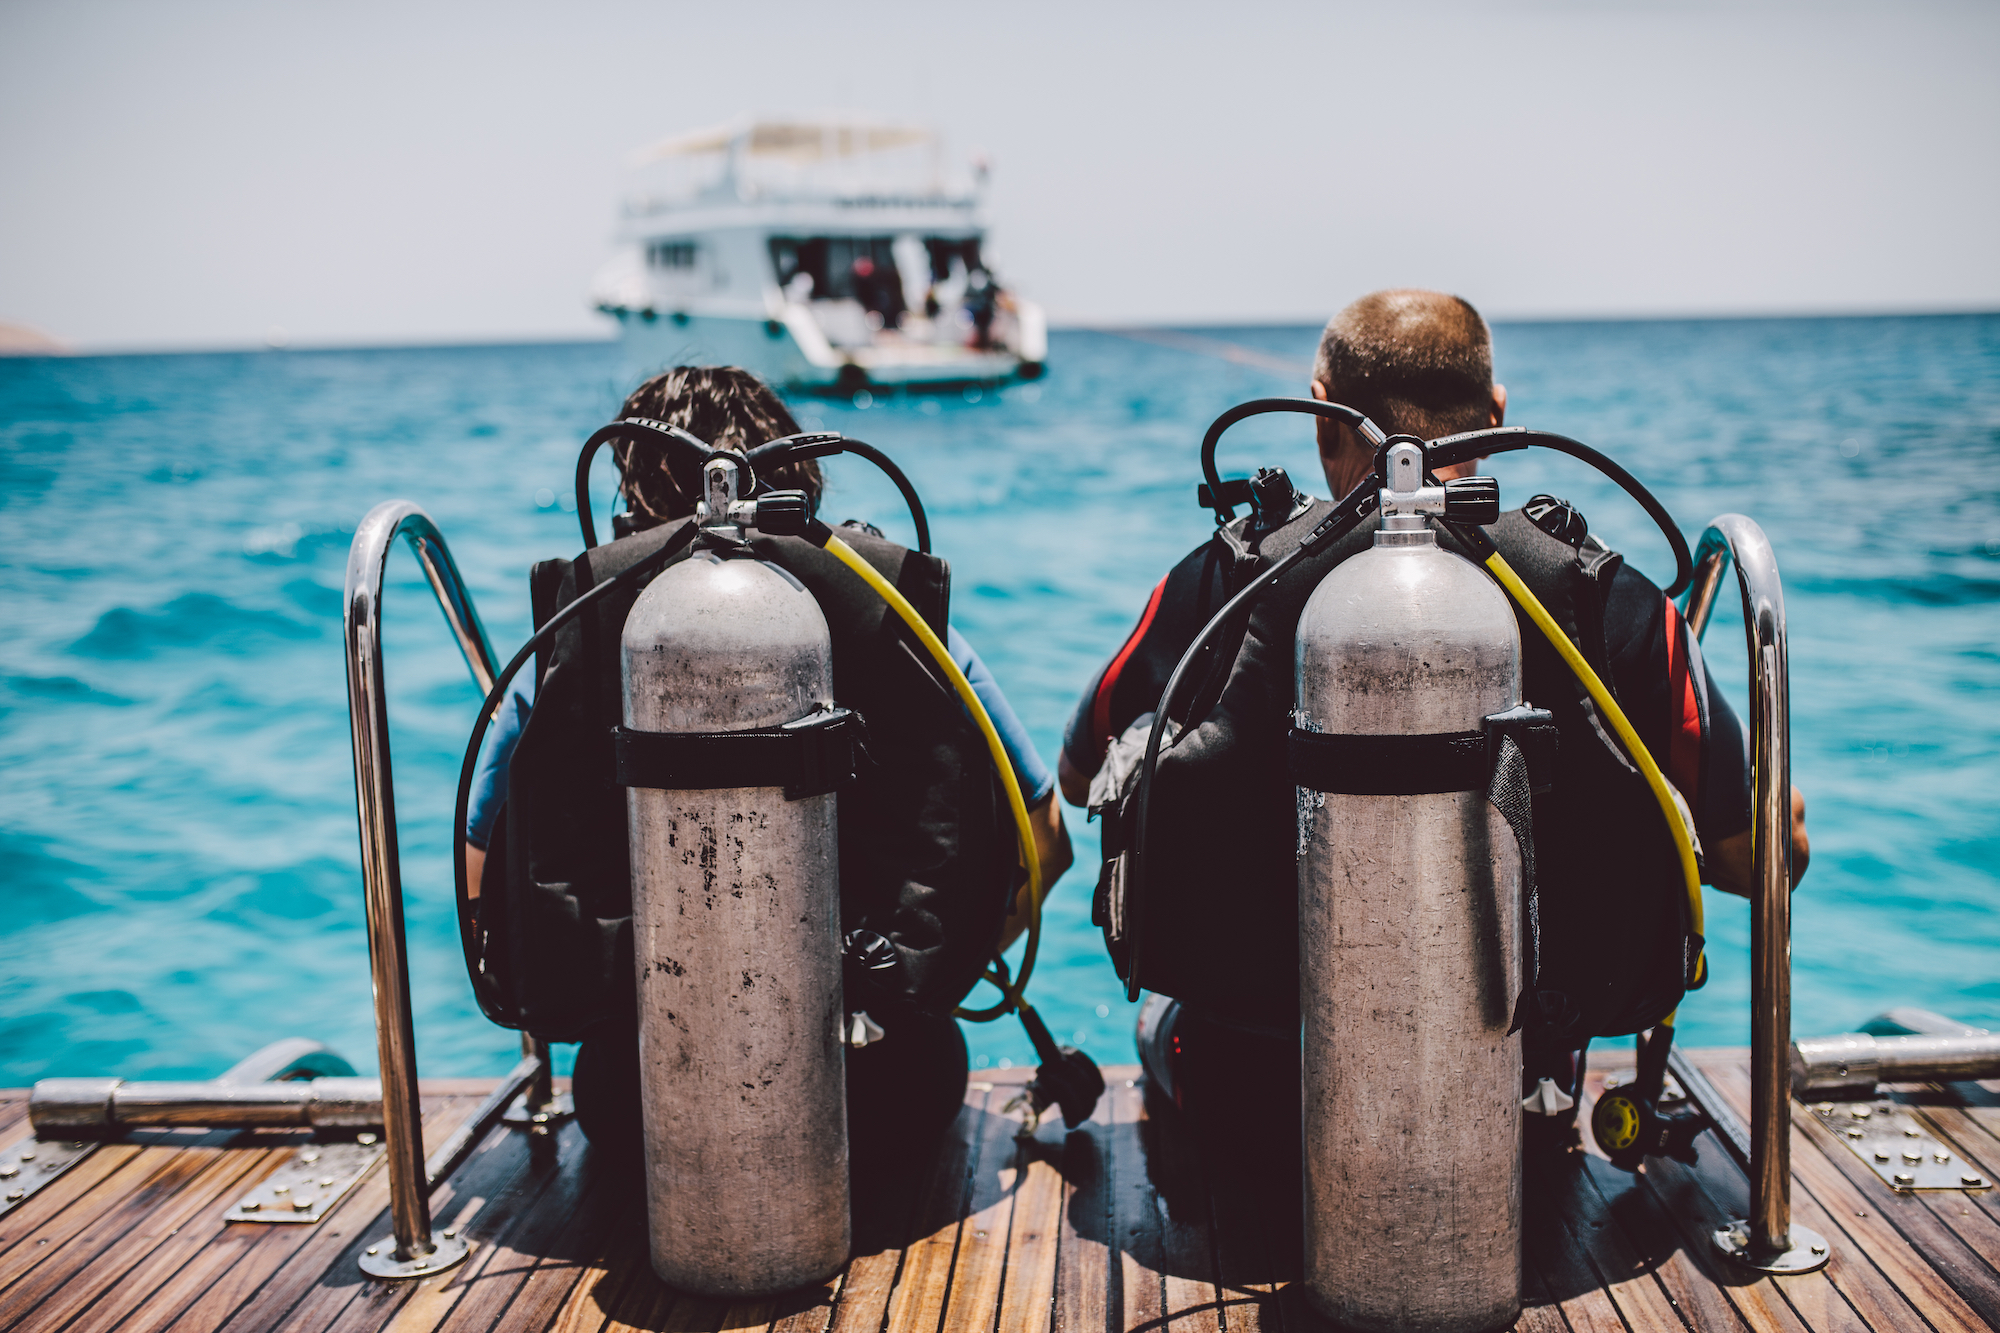 Two divers sitting on the deck of a boat, preparing to go scuba diving, which is lower risk than many other popular sports